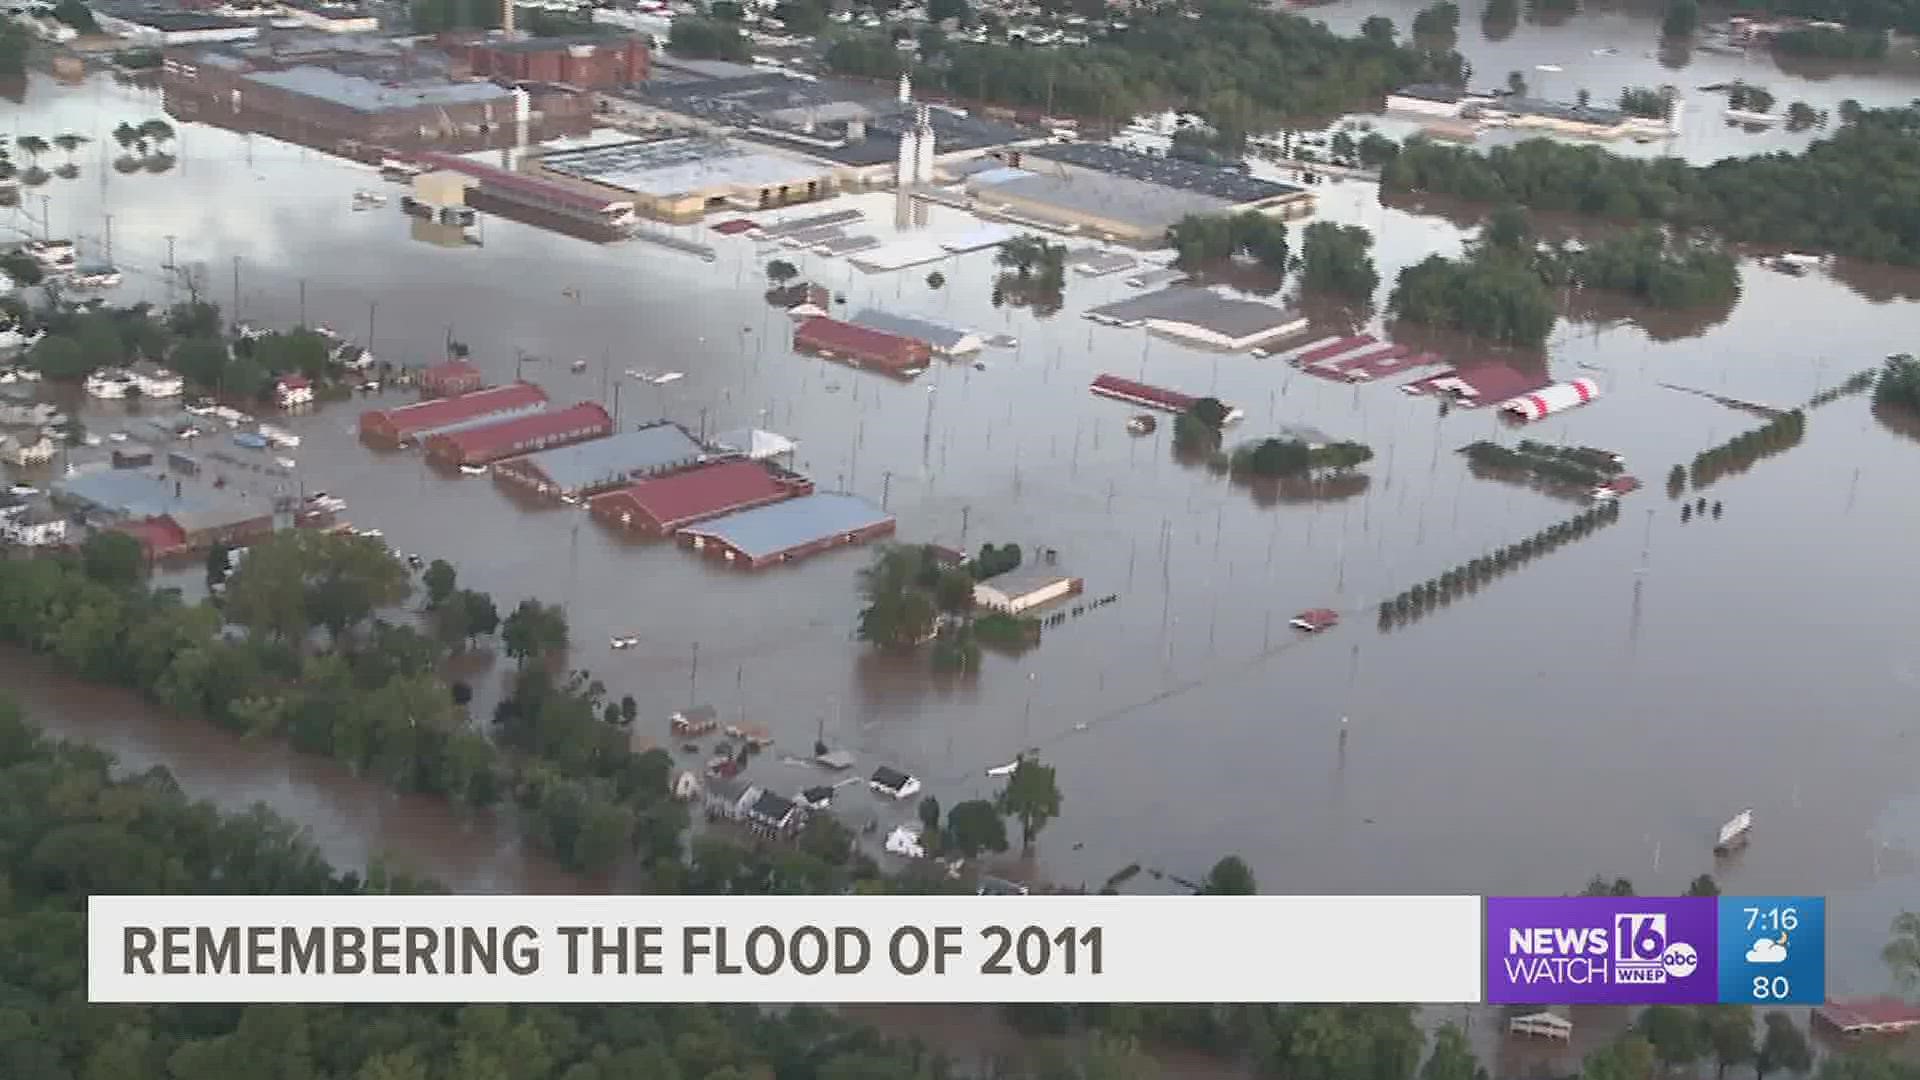 It's been ten years since people's lives were turned upside down in the flood of 2011 caused by Tropical Storm Lee.